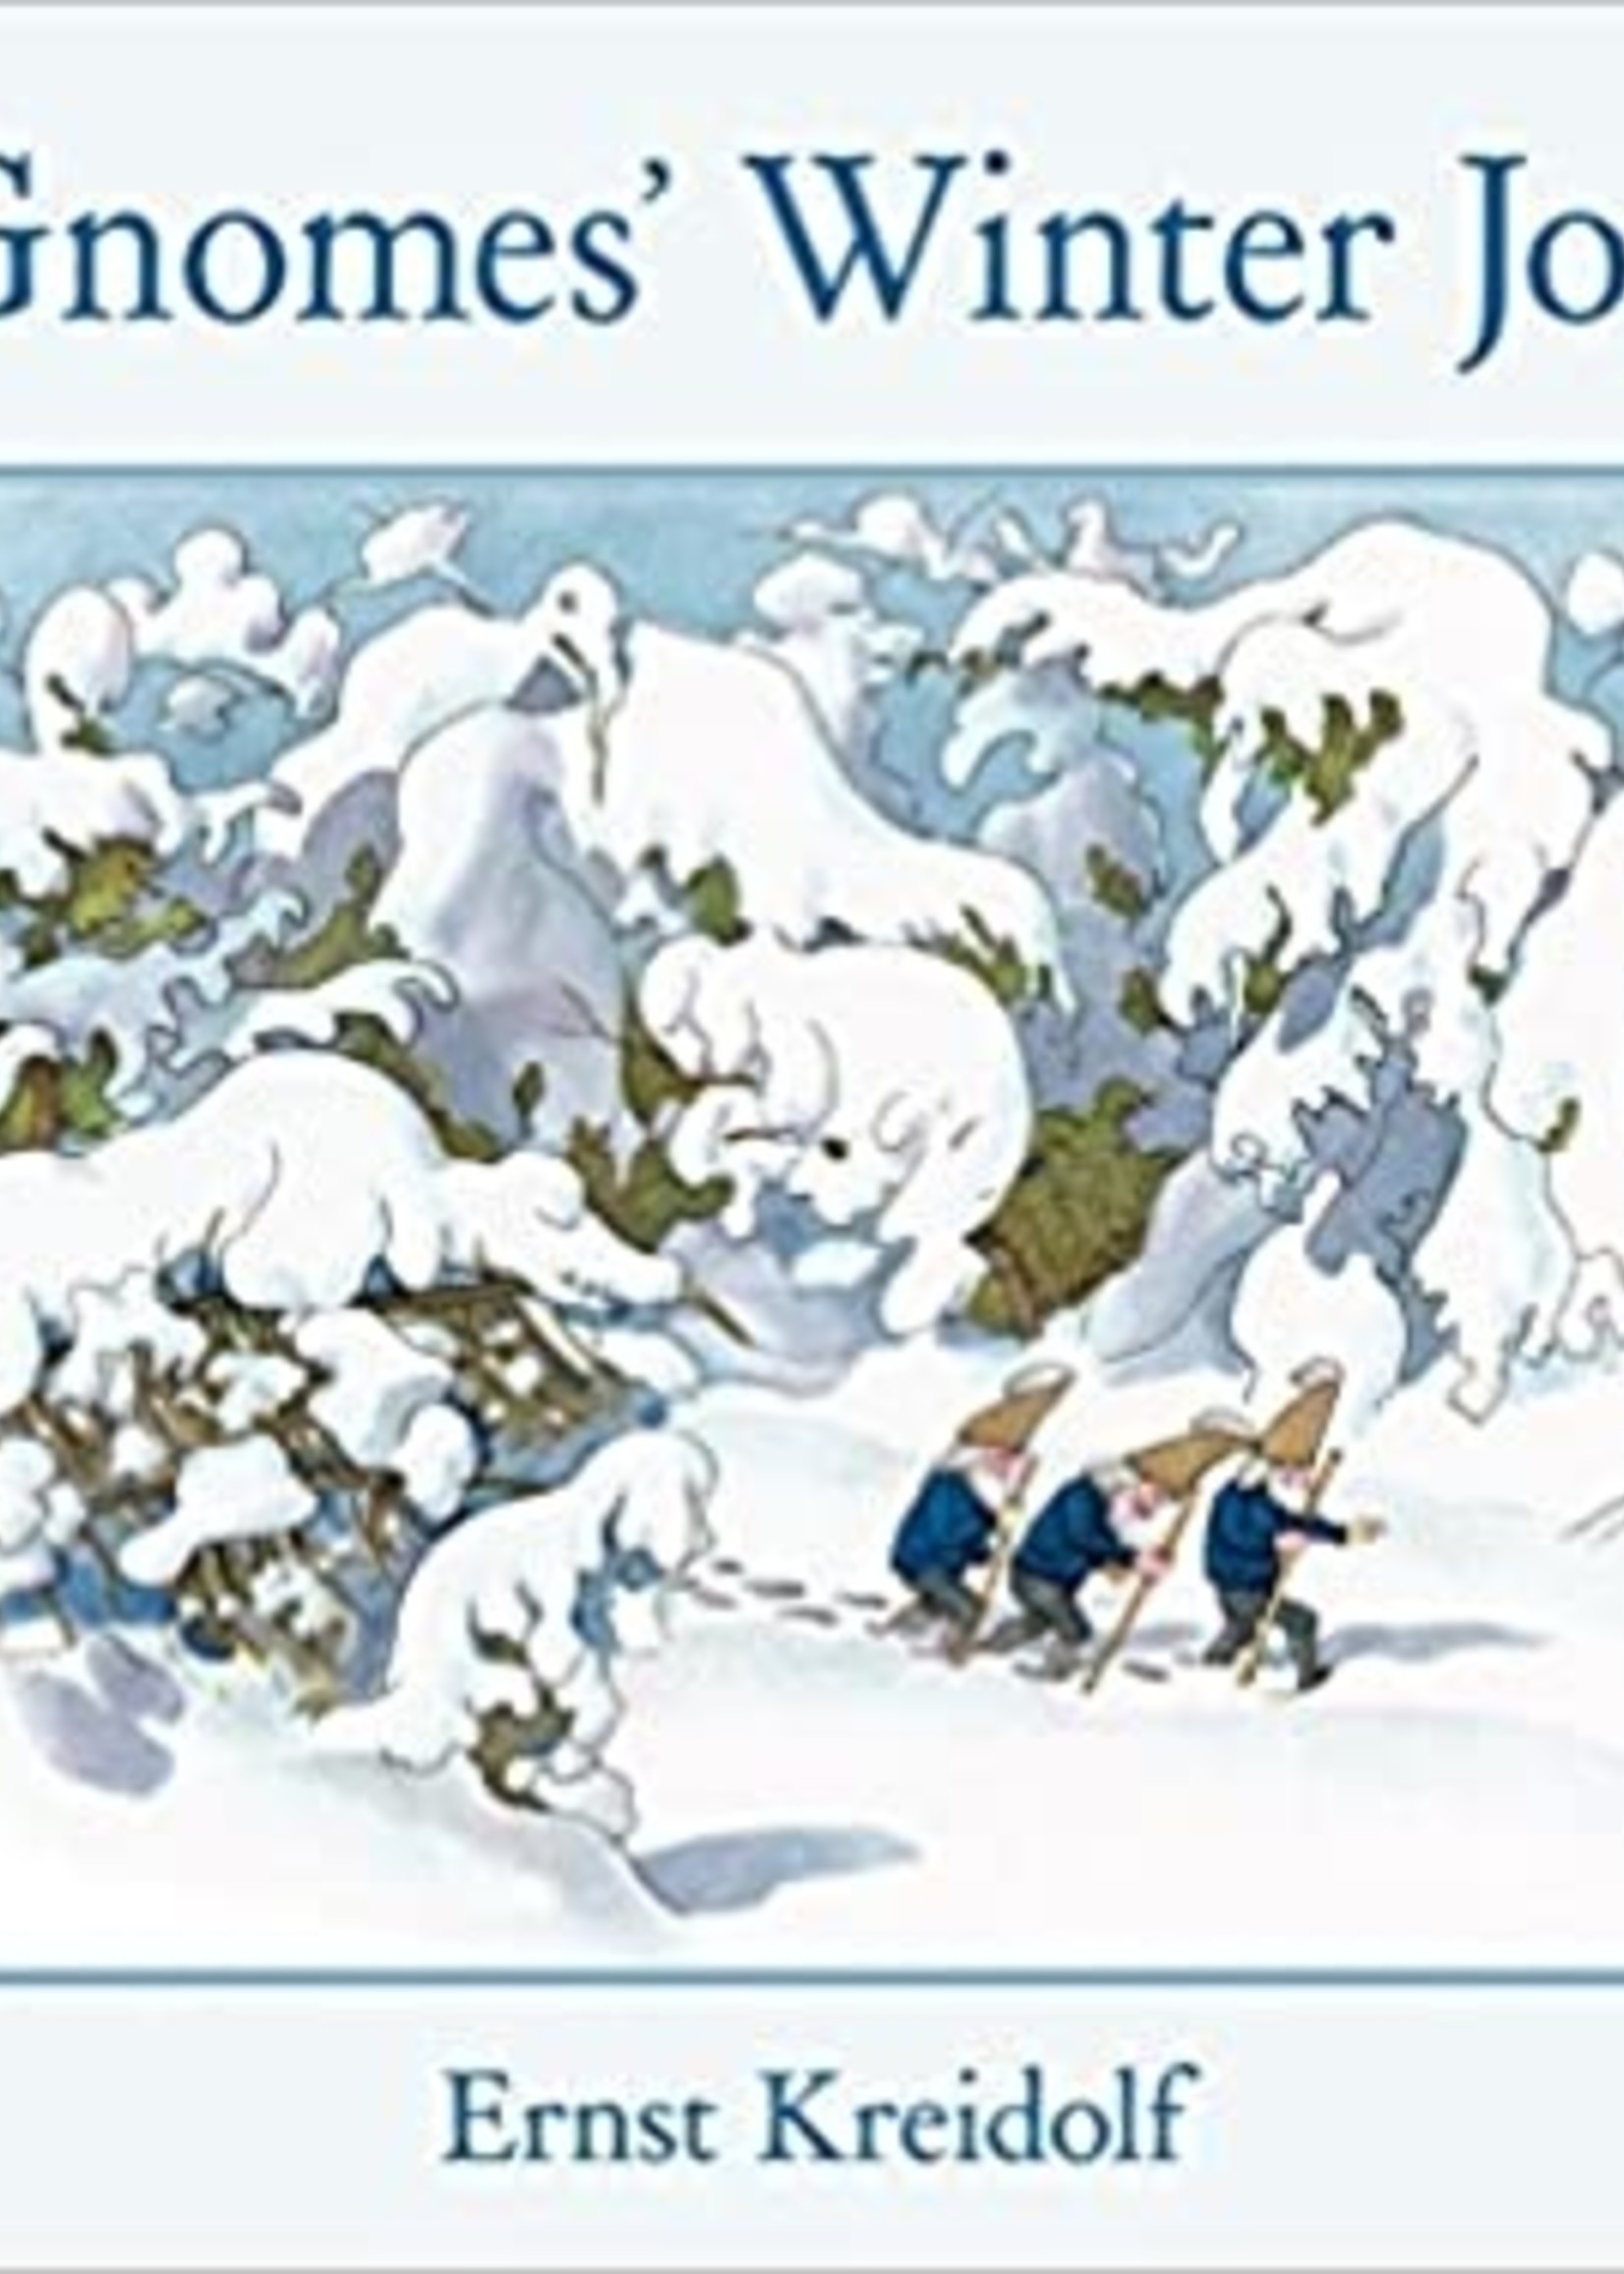 The Gnomes' Winter Journey - Hardcover